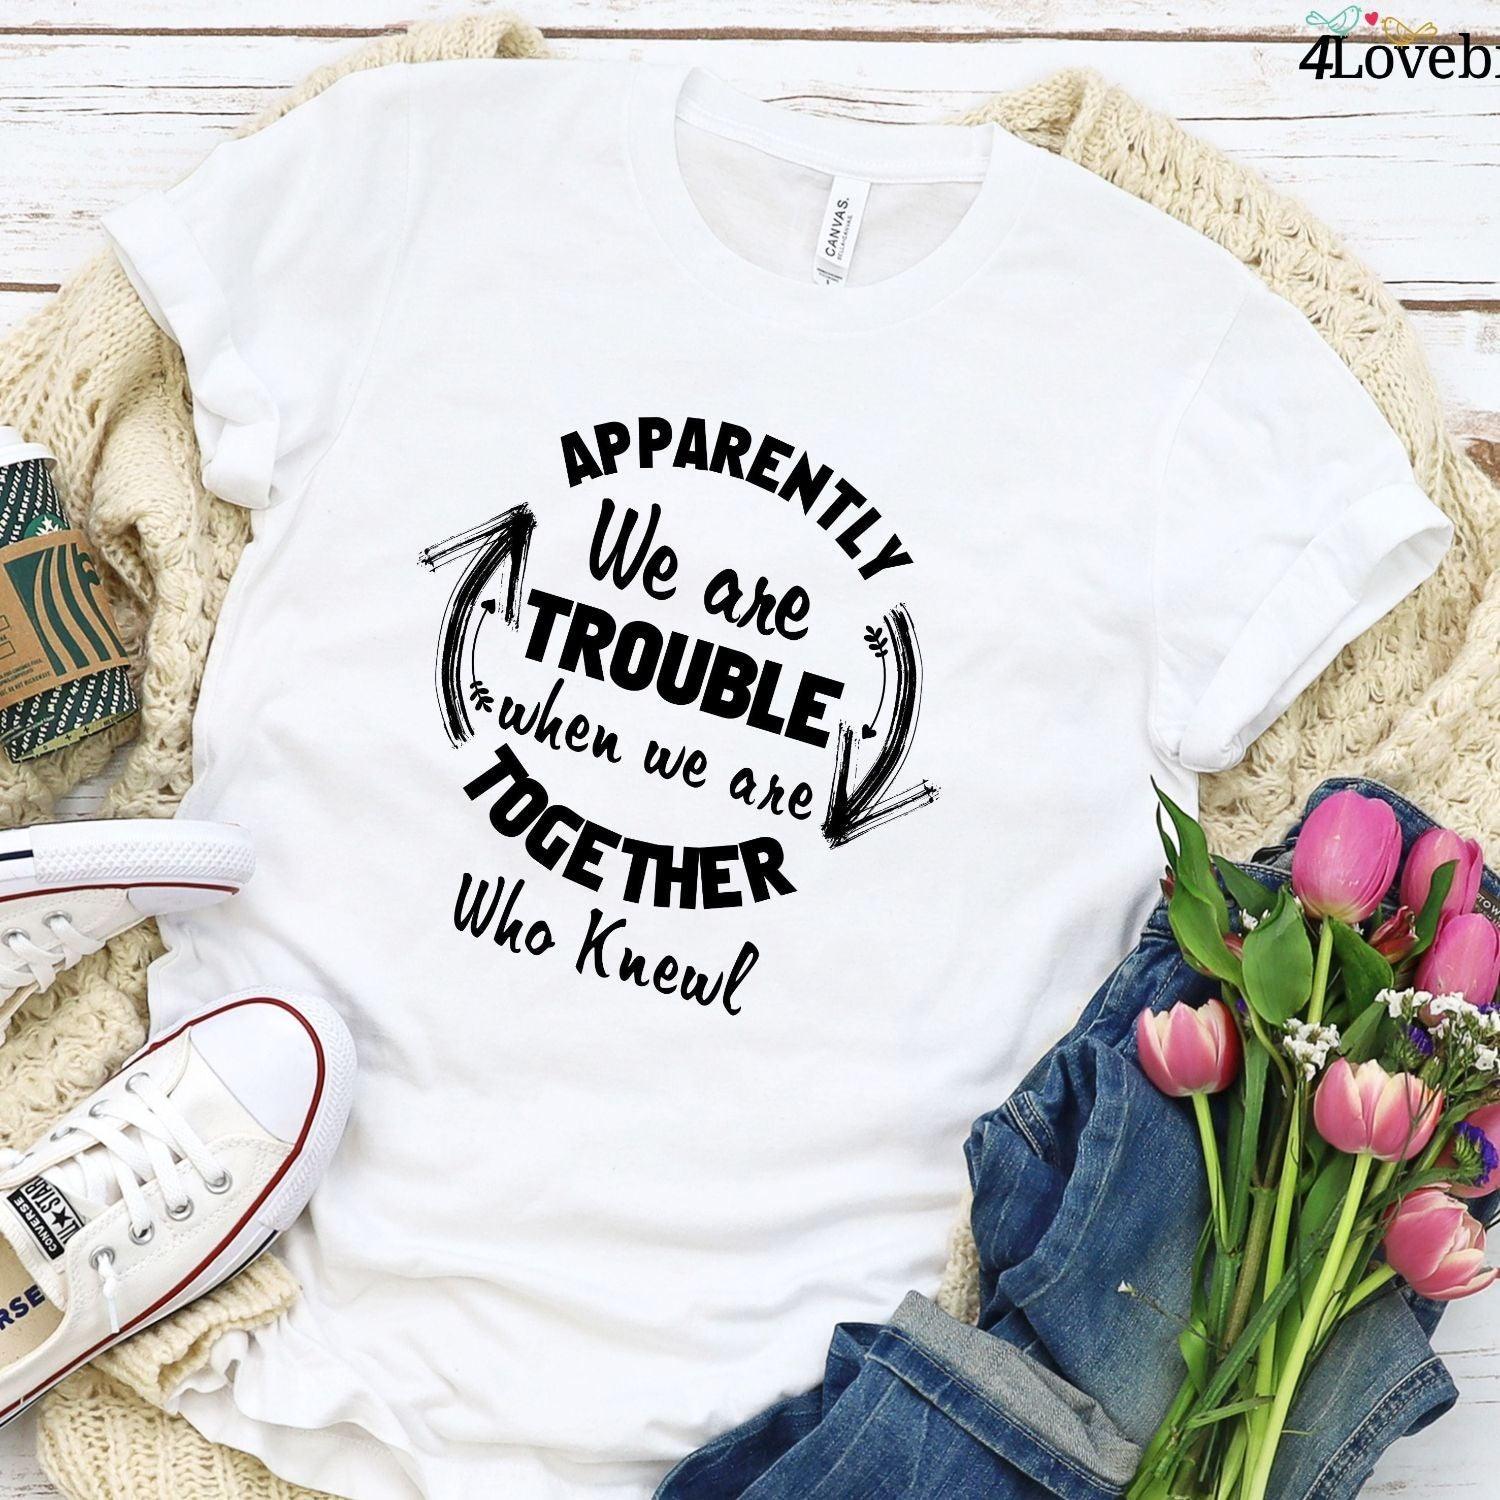 Apparently we are Trouble Matching Group Hoodie, Party Sweatshirt, Group Long Sleeve Shirt, Bachelorette & Bachelor Party Shirts, Gifts - 4Lovebirds